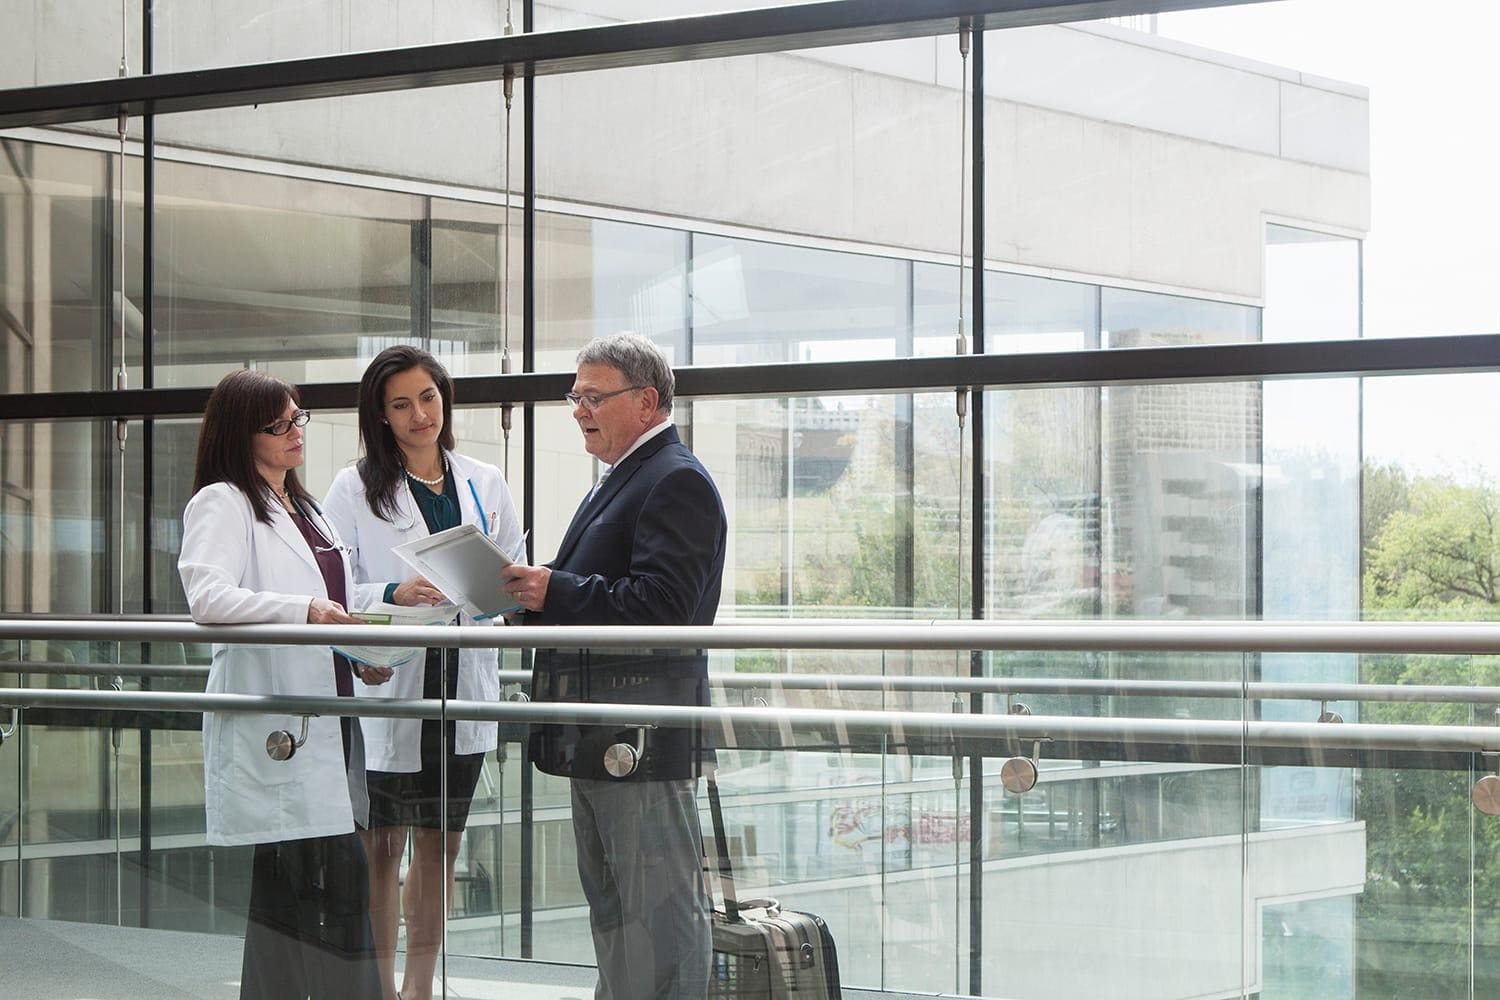 Male pharmaceutical representative with two female doctors looking at paperwork in medical facility skywalk area